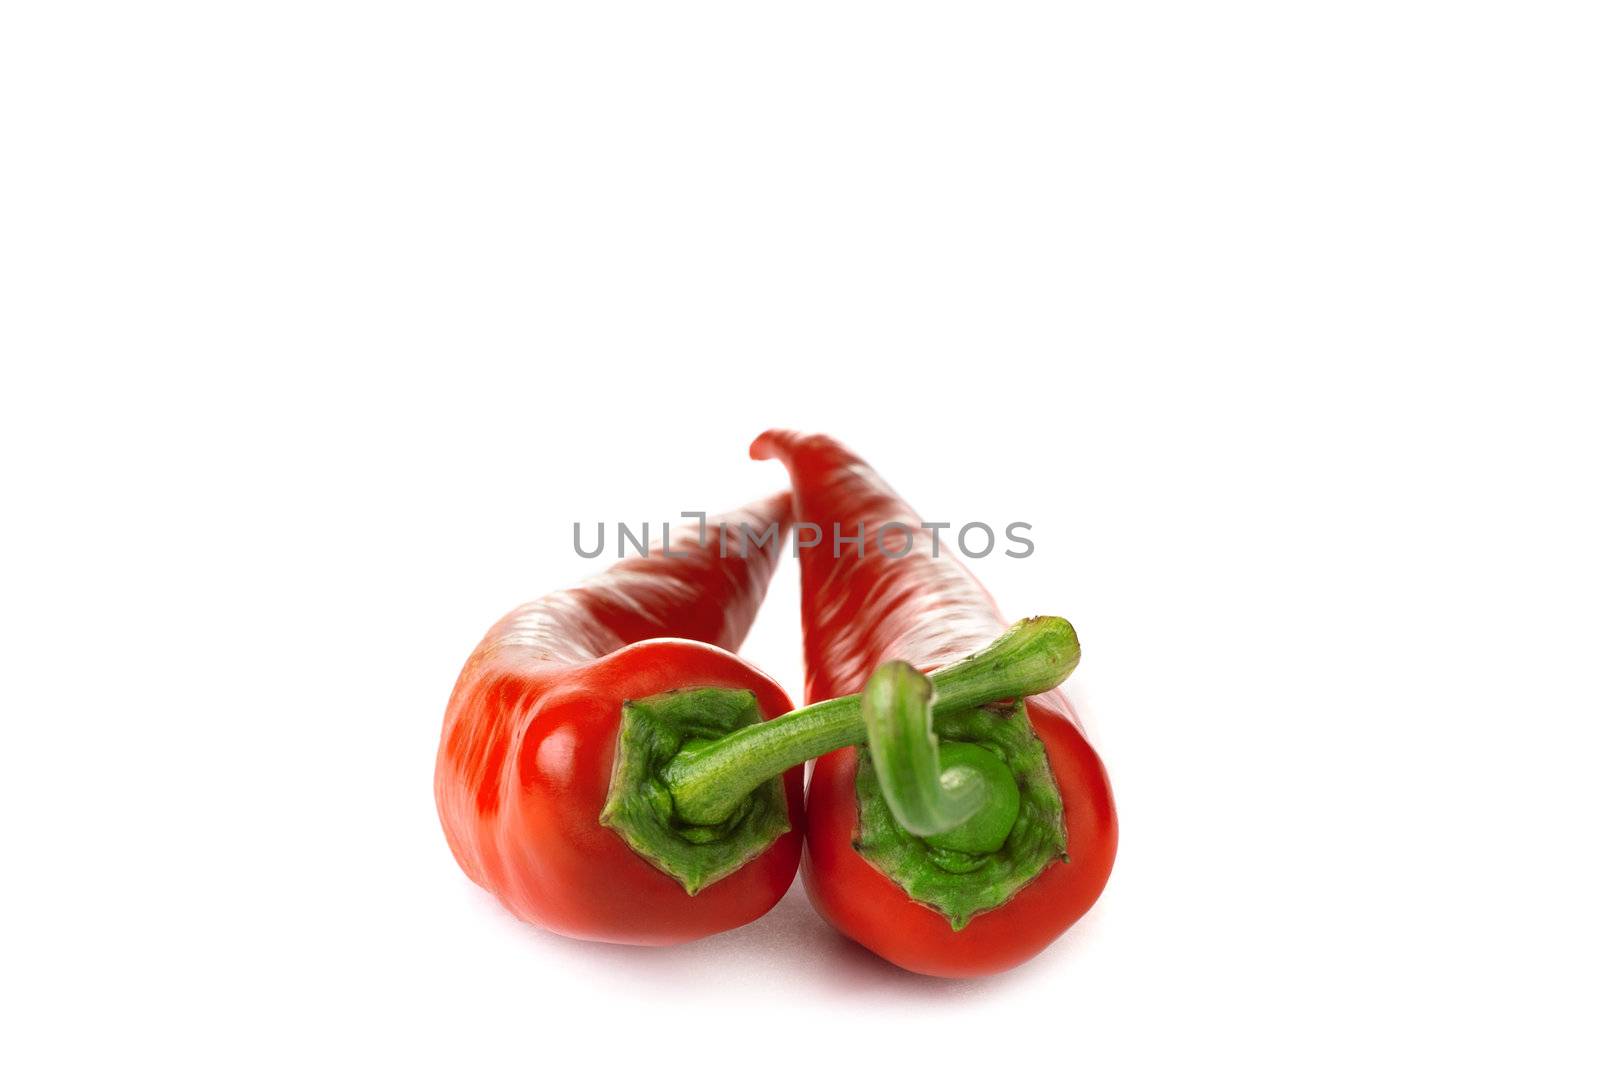 Two red chili peppers isolated on a white background